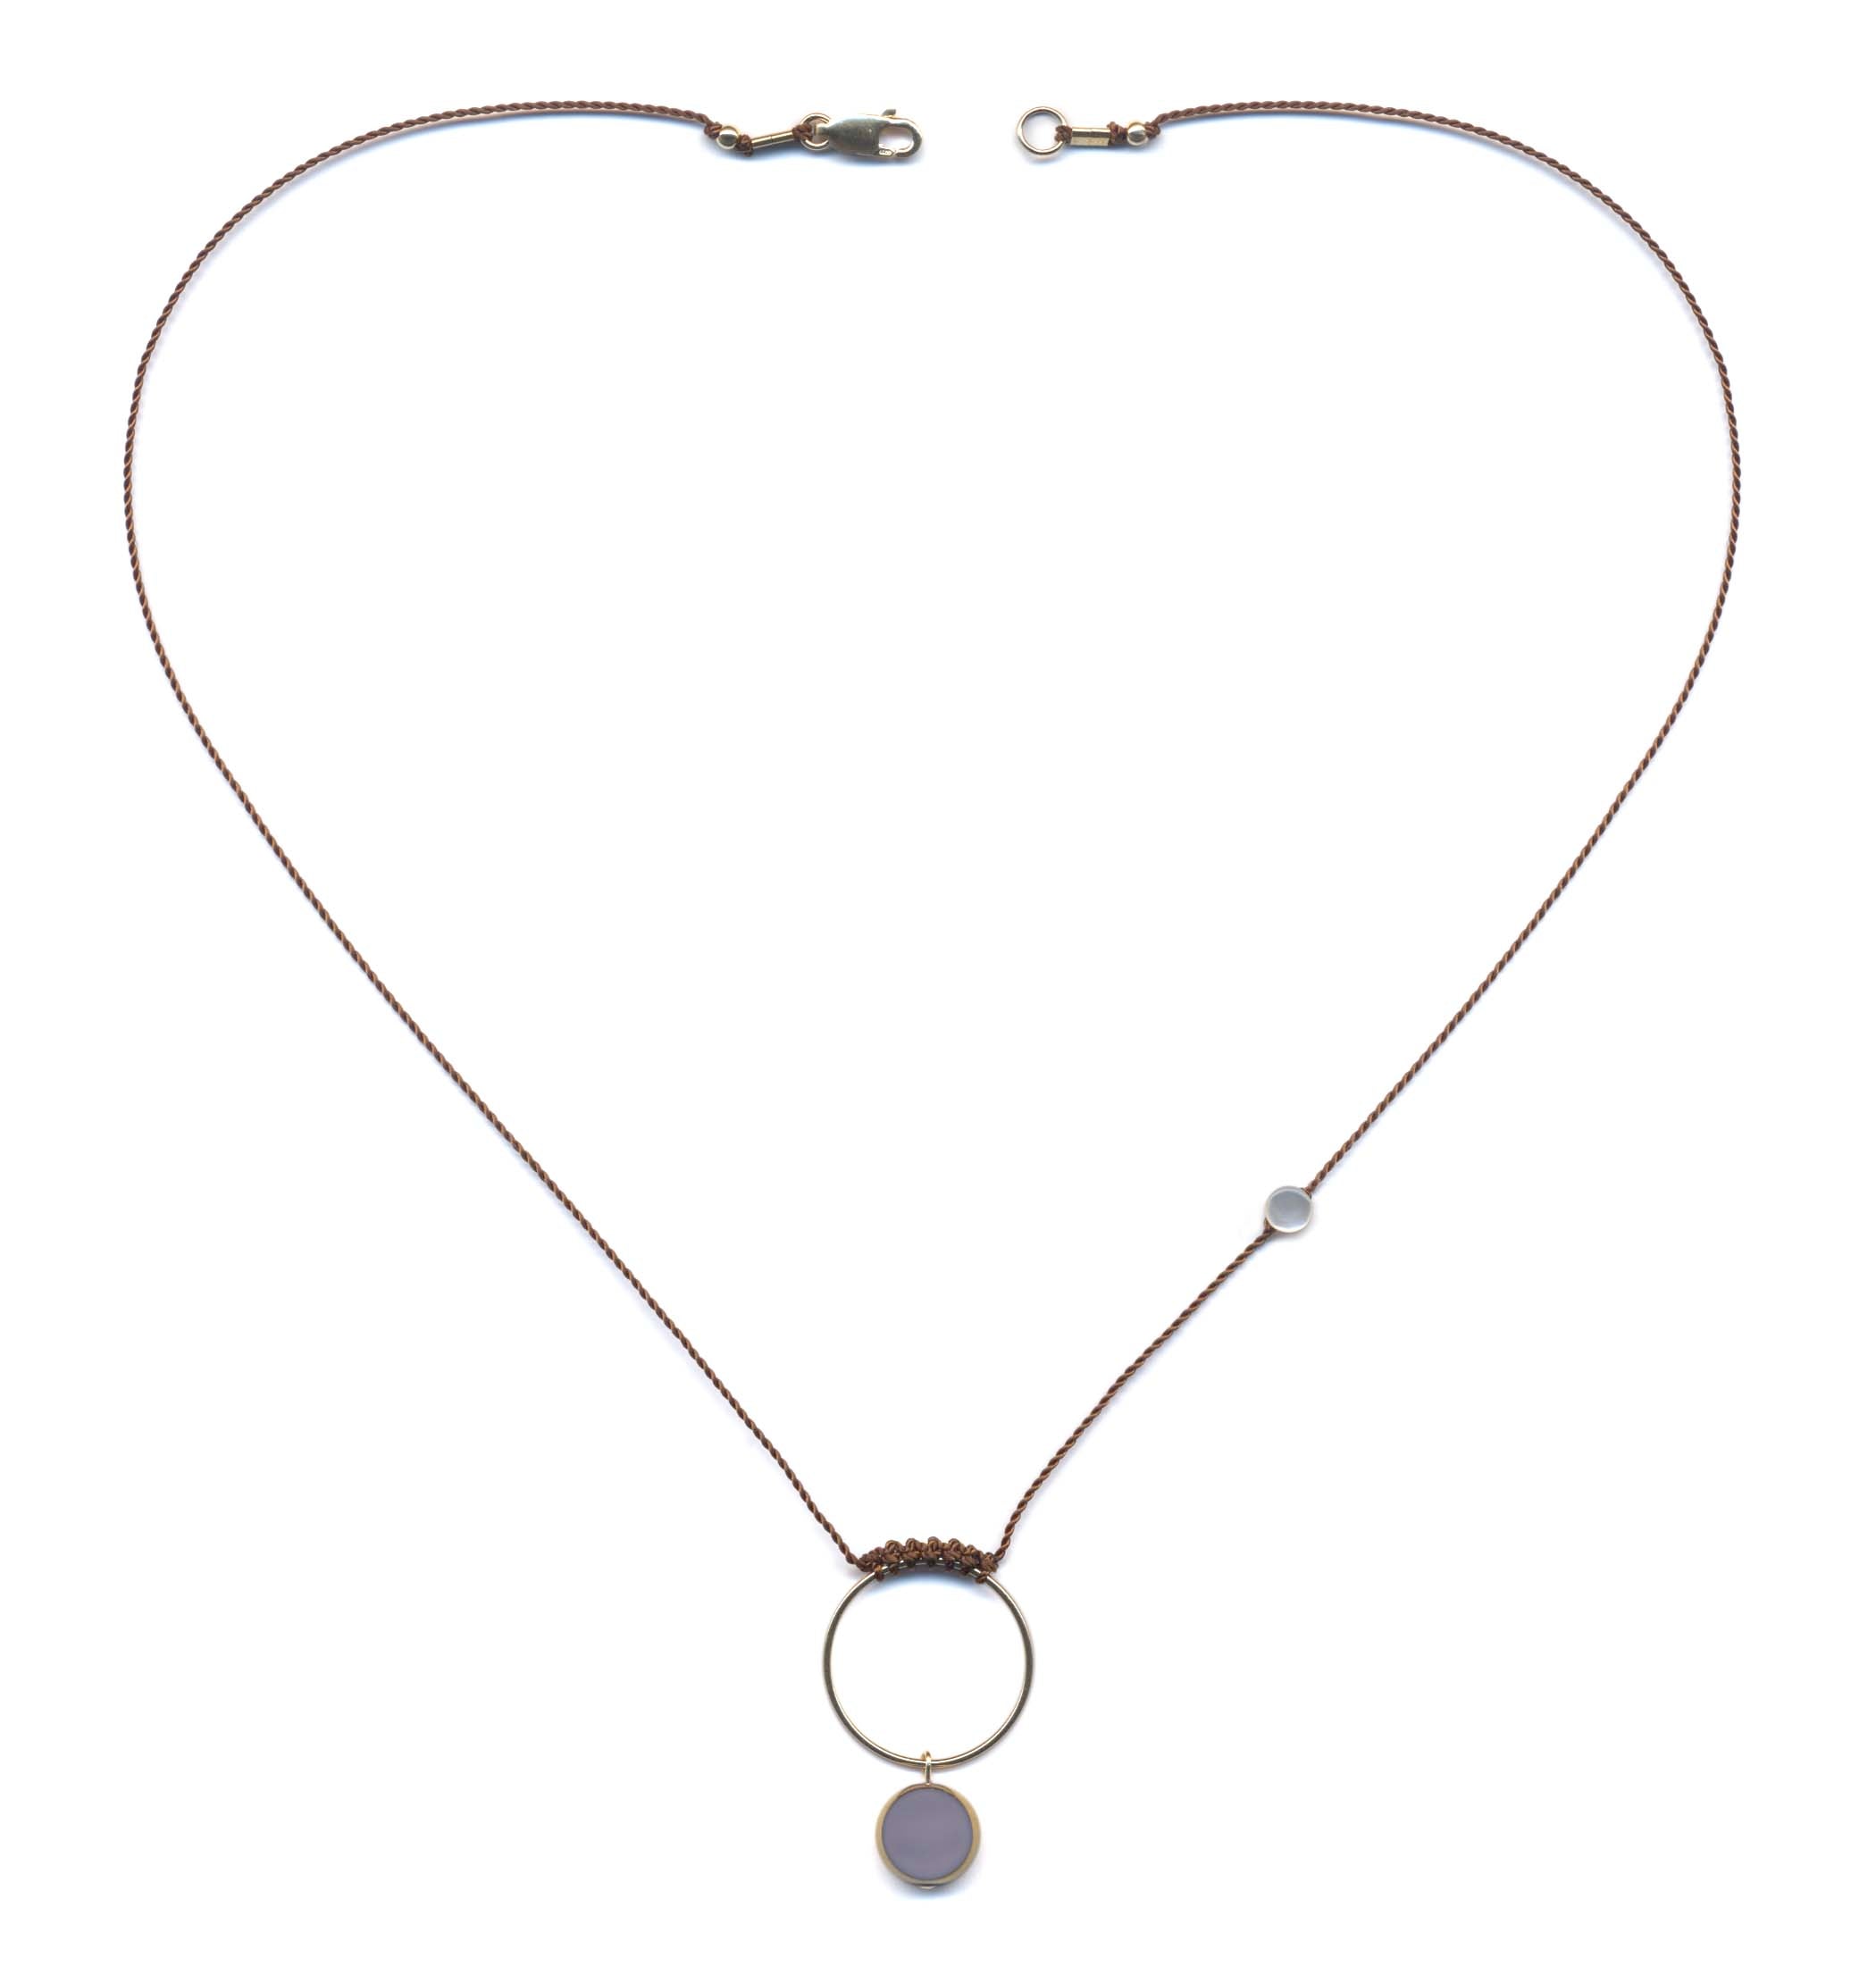 N2058 Roped Lavender Charm Necklace